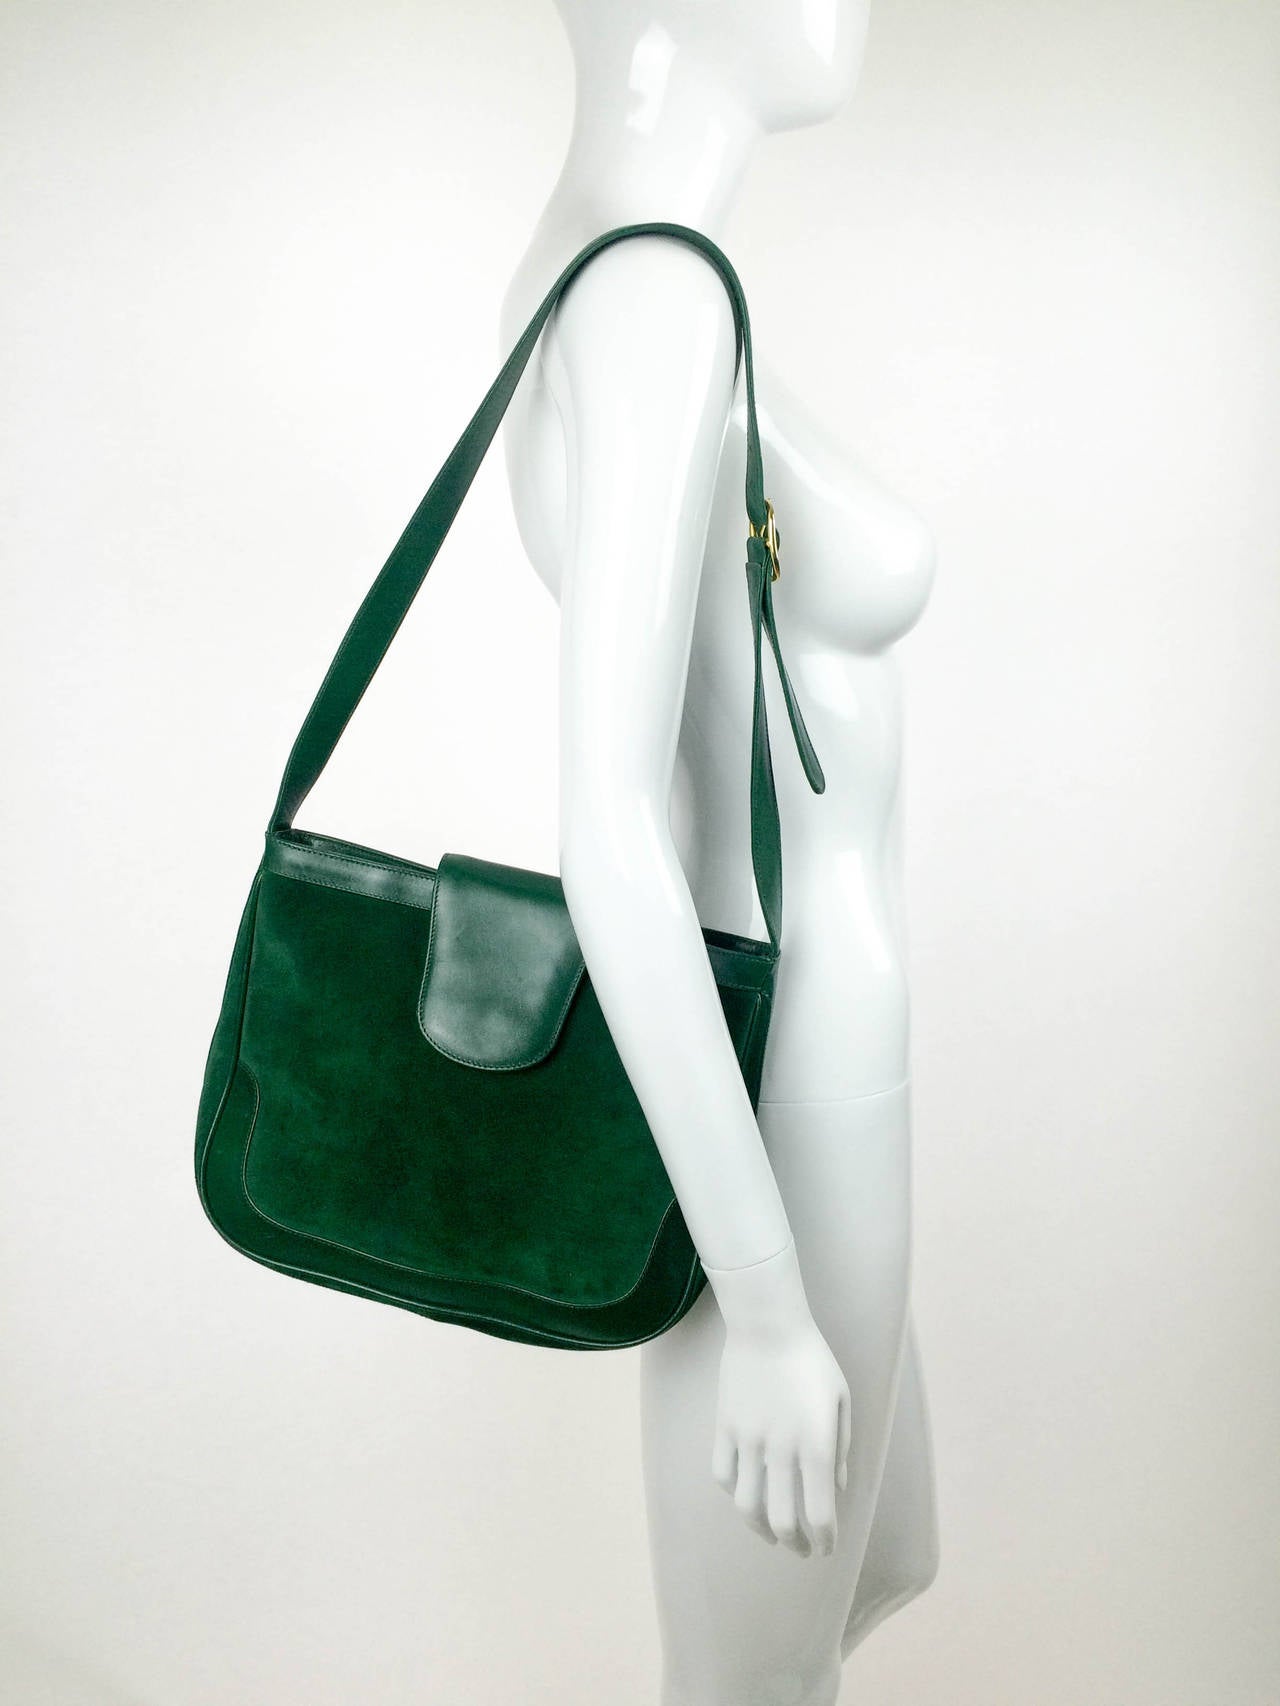 Rare Gucci Emerald Green Shoulder Bag - 1970s In Excellent Condition In London, Chelsea